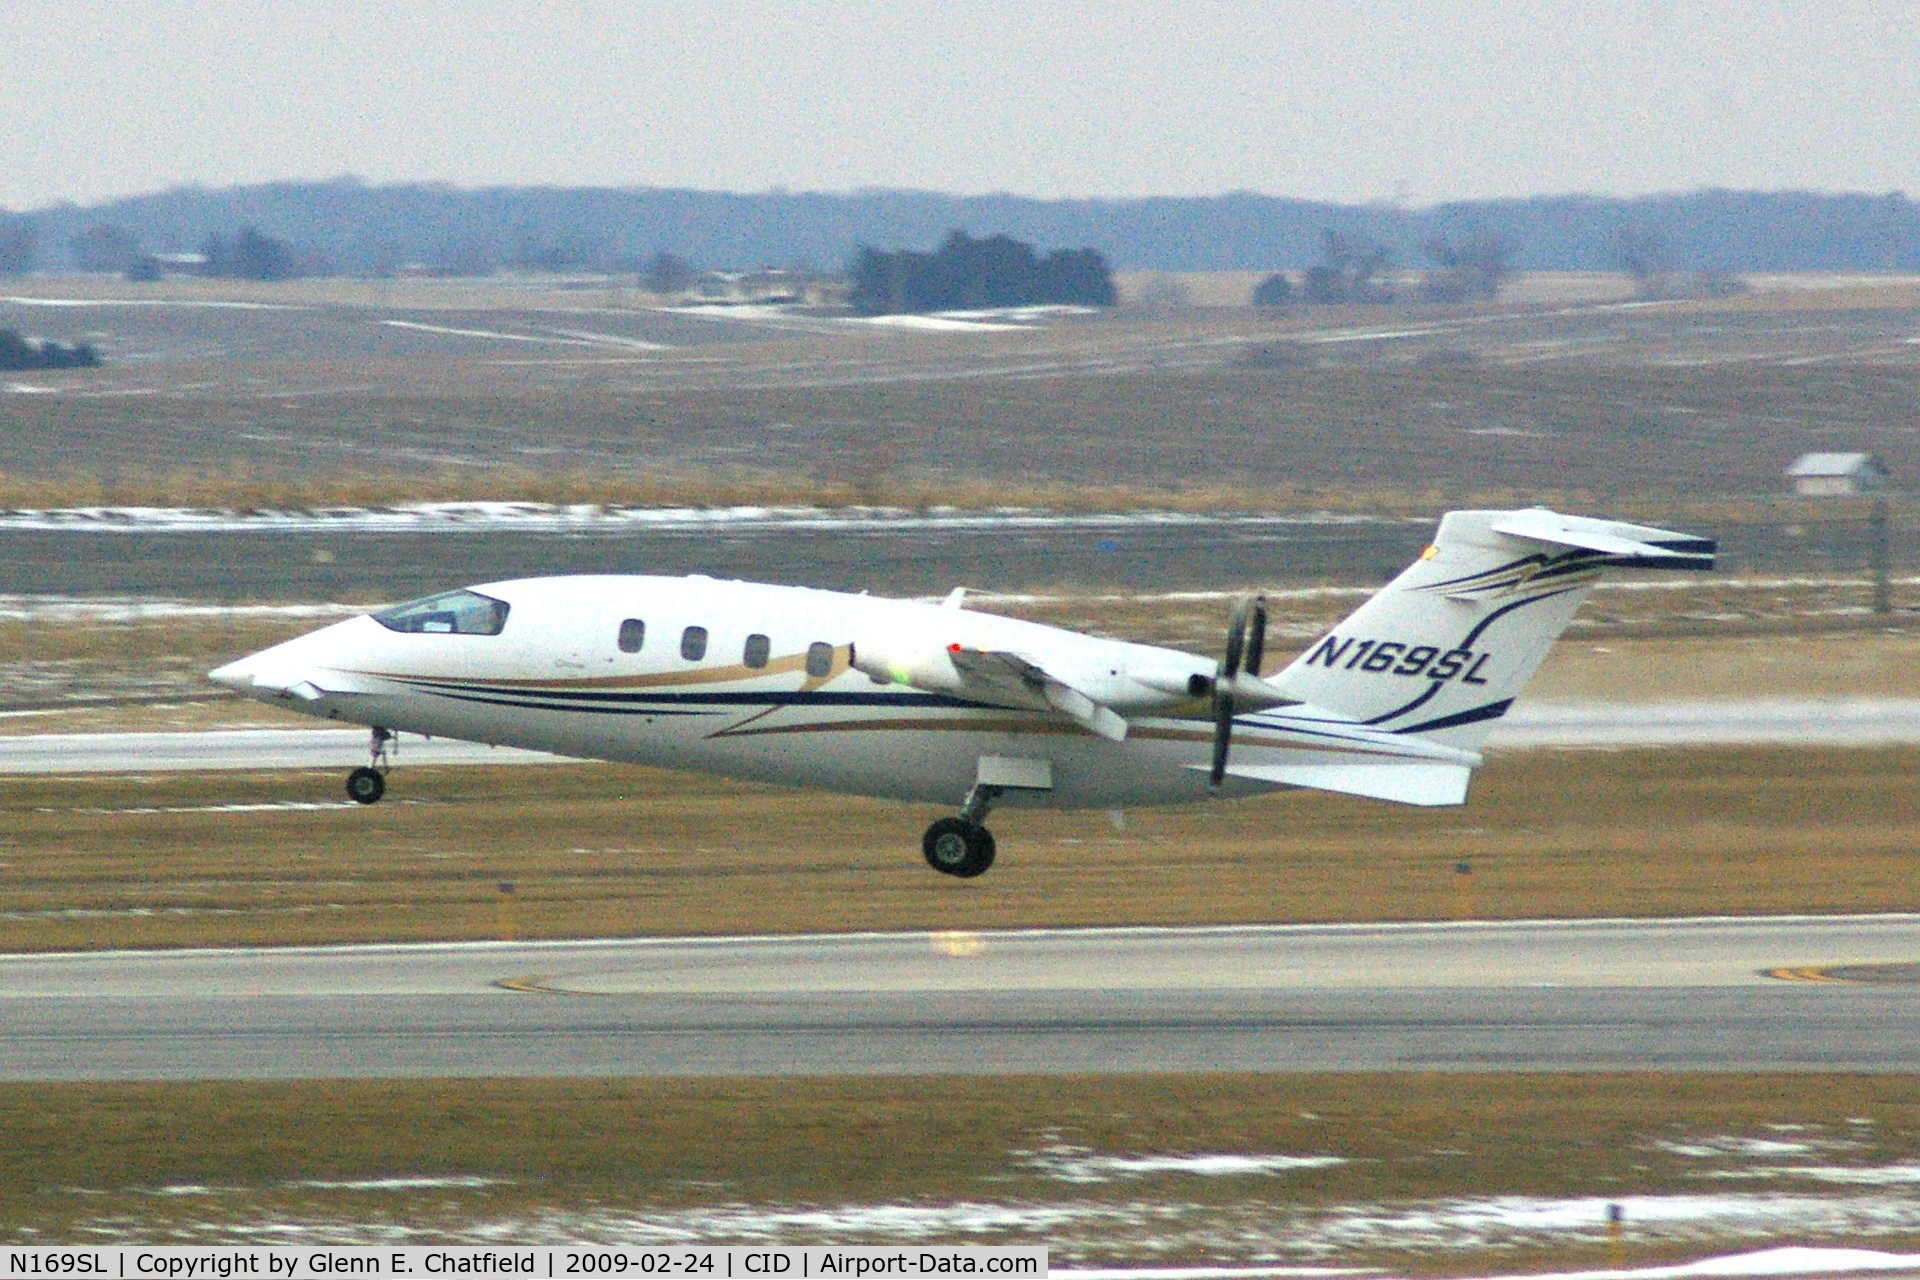 N169SL, 2007 Piaggio P-180 Avanti C/N 1140, Departing Ruway 13 just after sunrise with overcast sky, ISO 1600